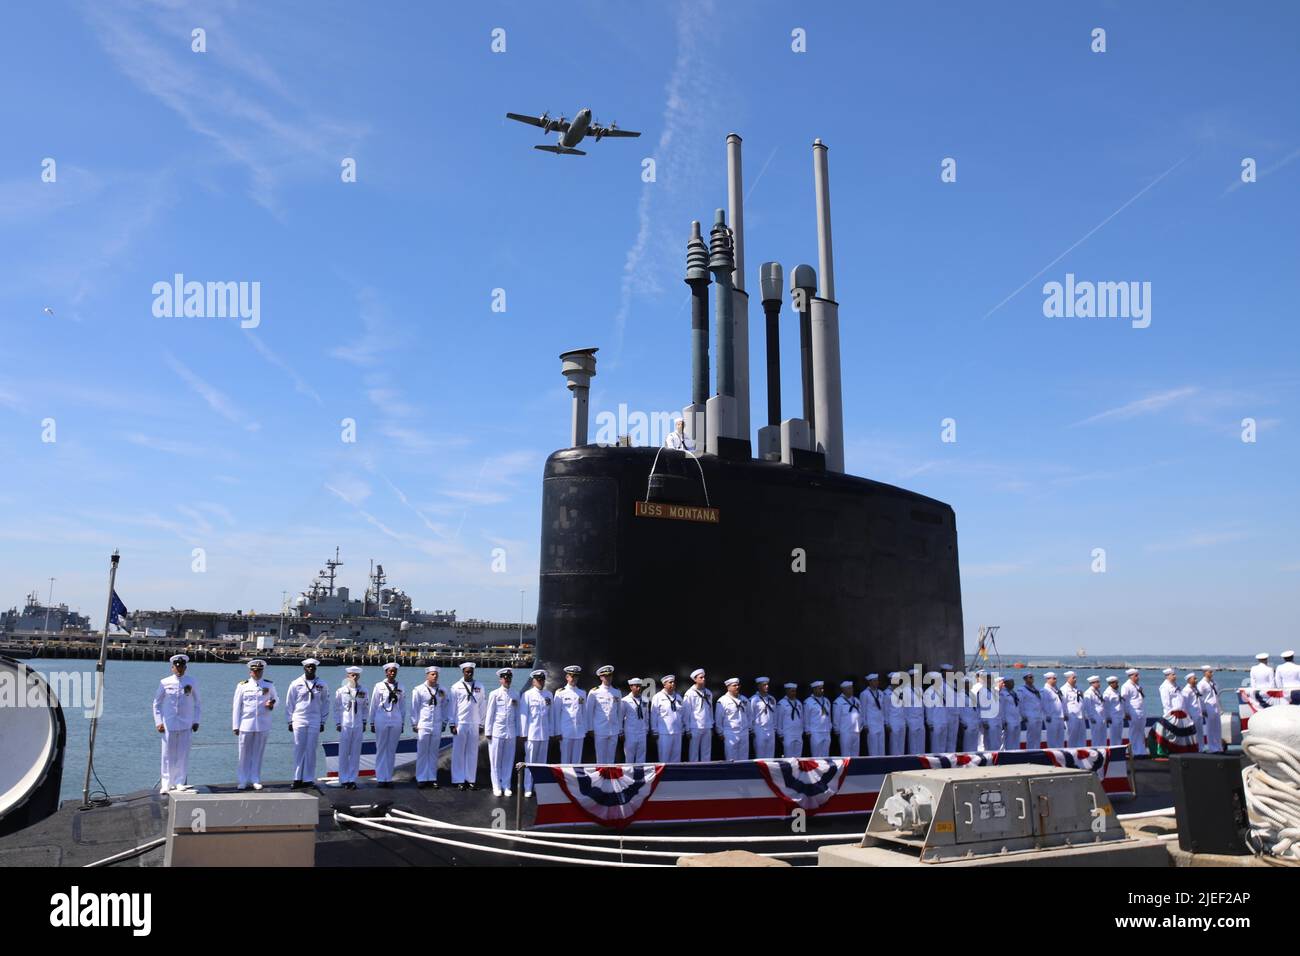 220625-N-UZ446-0251 NORFOLK, Virginia (June 25, 2022) – Crewmembers attached to the Virginia-class fast attack submarine USS Montana (SSN 794) man the ship during a commissioning ceremony in Norfolk, Va., June 25, 2022. SSN 794, the second U.S Navy ship launched with the name Montana and first in more than a century, is a flexible, multi-mission platform designed to carry out the seven core competencies of the submarine force: anti-submarine warfare; anti-surface warfare; delivery of special operations forces; strike warfare; irregular warfare; intelligence, surveillance and reconnaissance; an Stock Photo